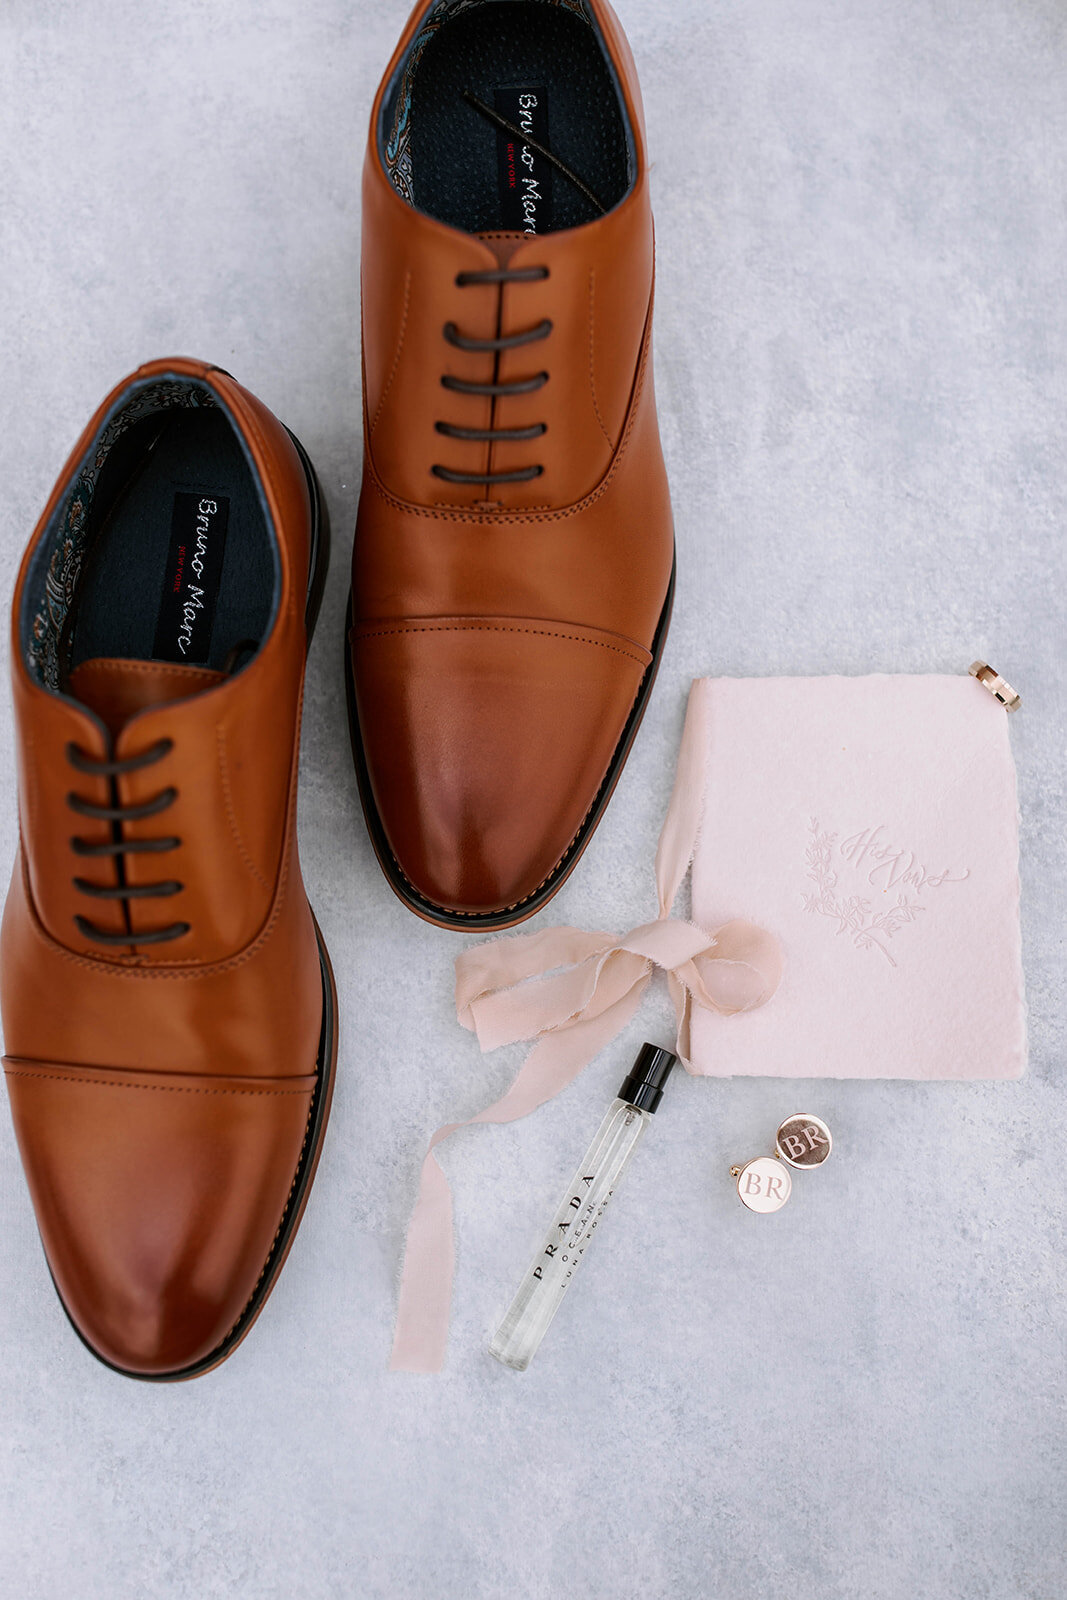 groom details flatlay photo with dress shoes, vow book and cologne